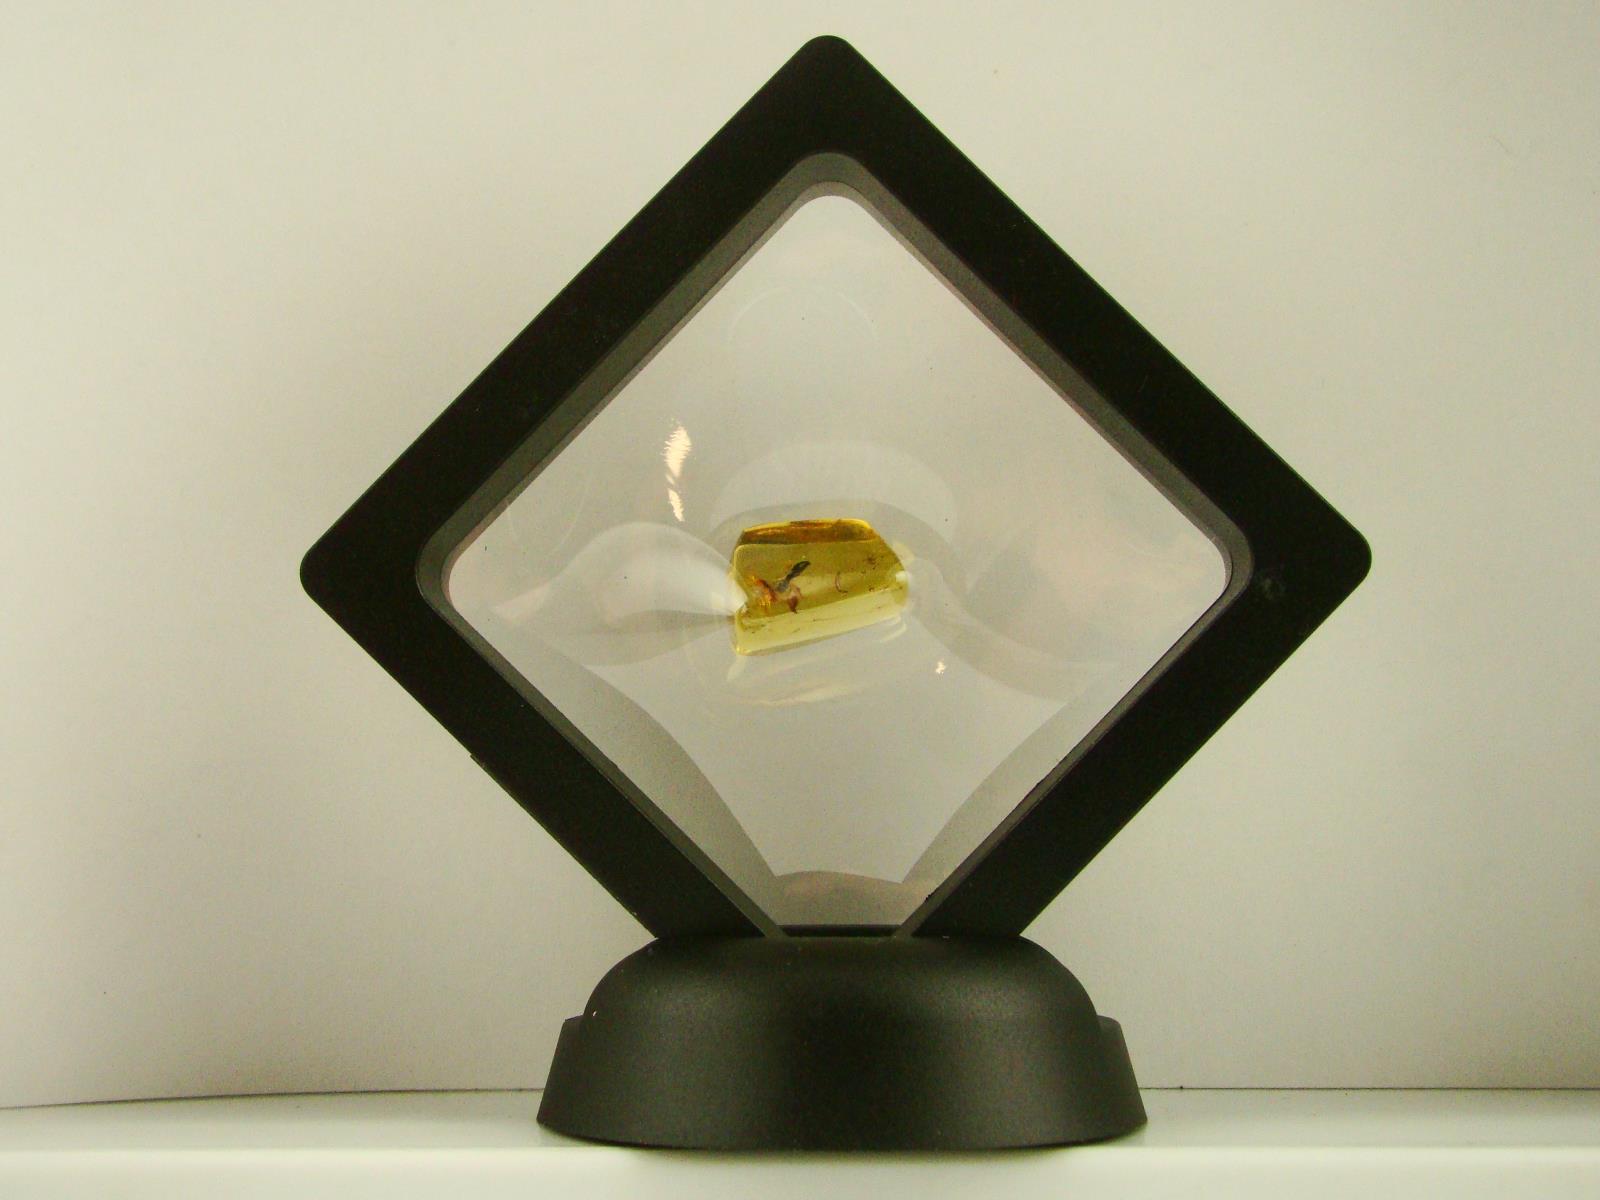 Baltic Amber Fossil with Insect Inside - Specimen in Display Case #A5